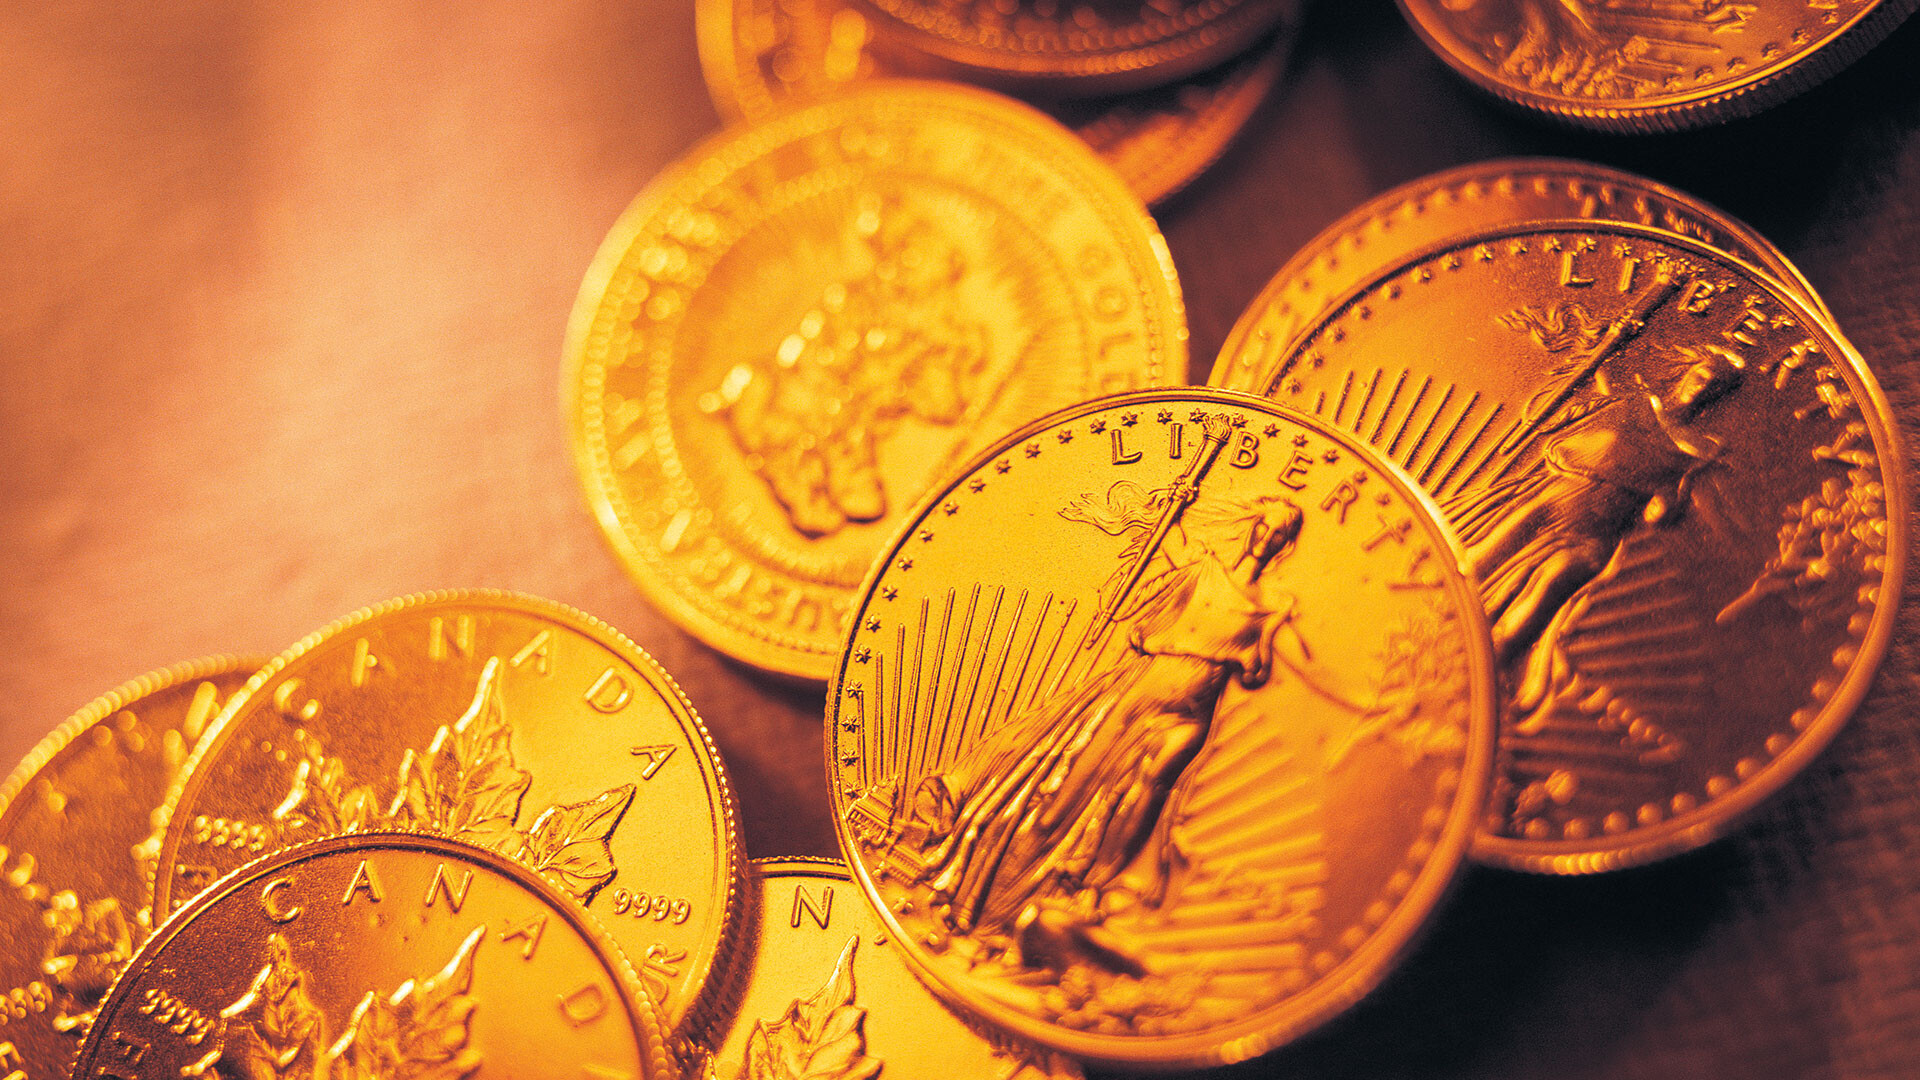 Gold Coins: USA Liberty coin, Liberty themed collection of Mint-quality coins, Mint marks. 1920x1080 Full HD Background.